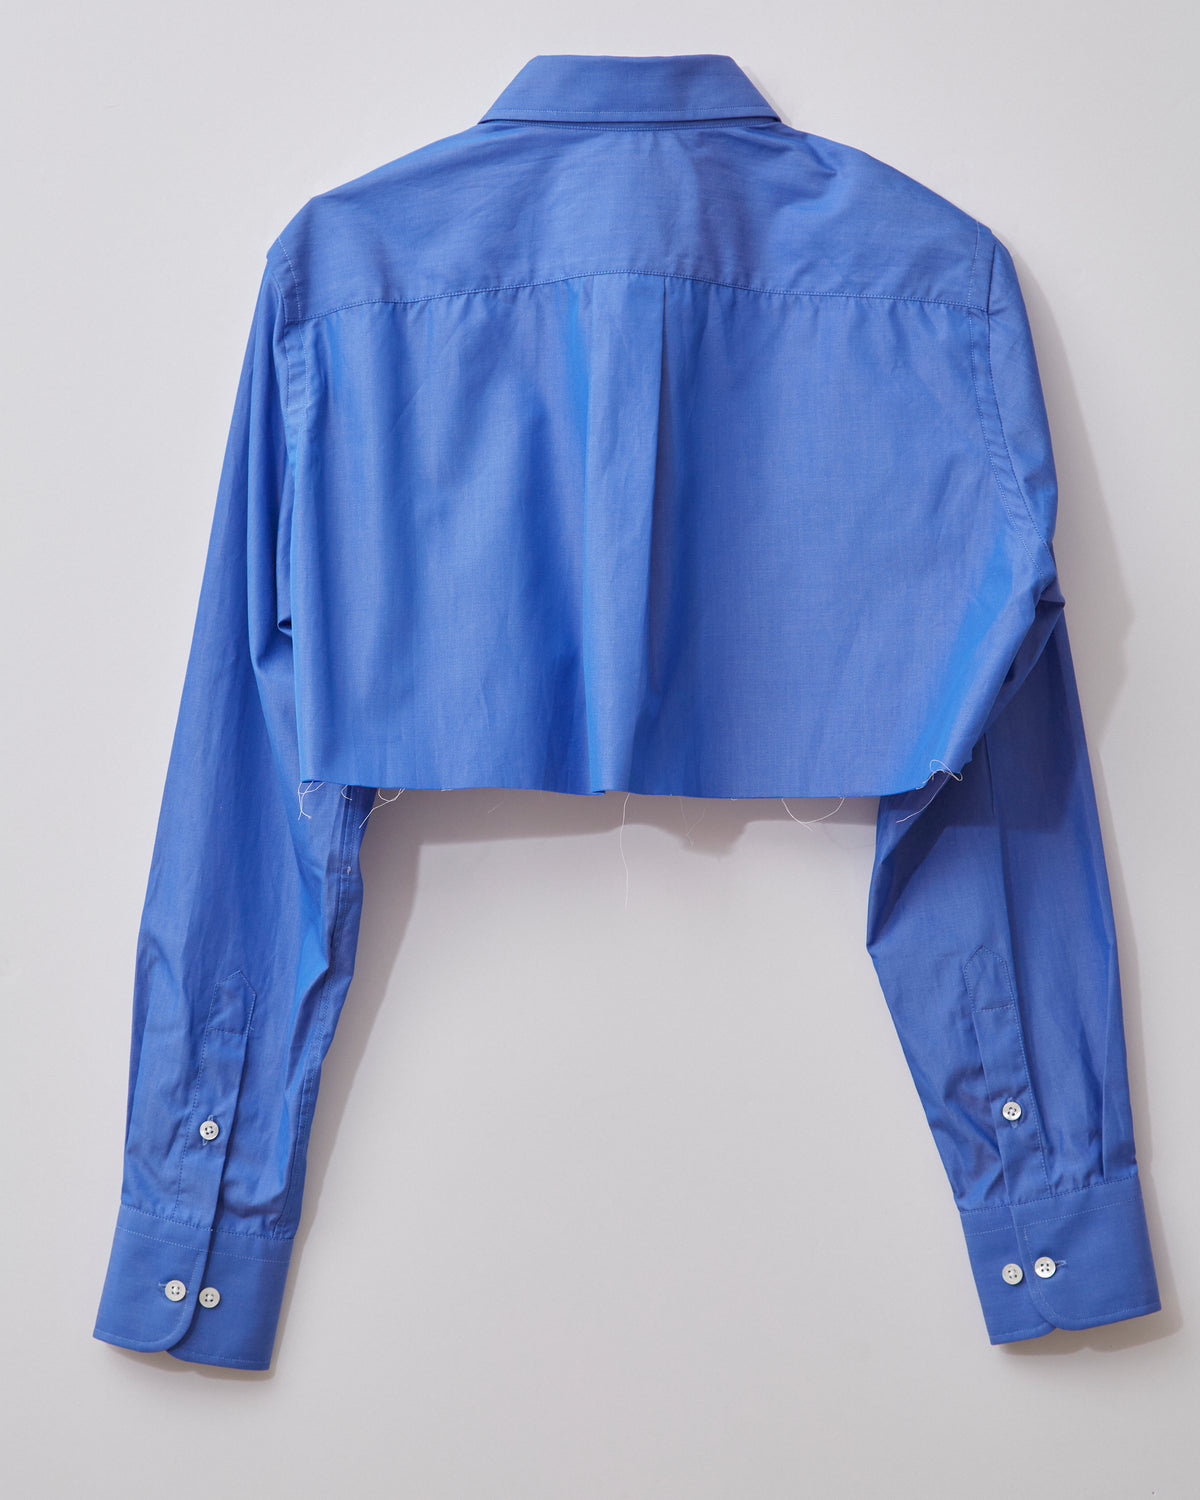 Super Cropped Shirt in Royal Blue